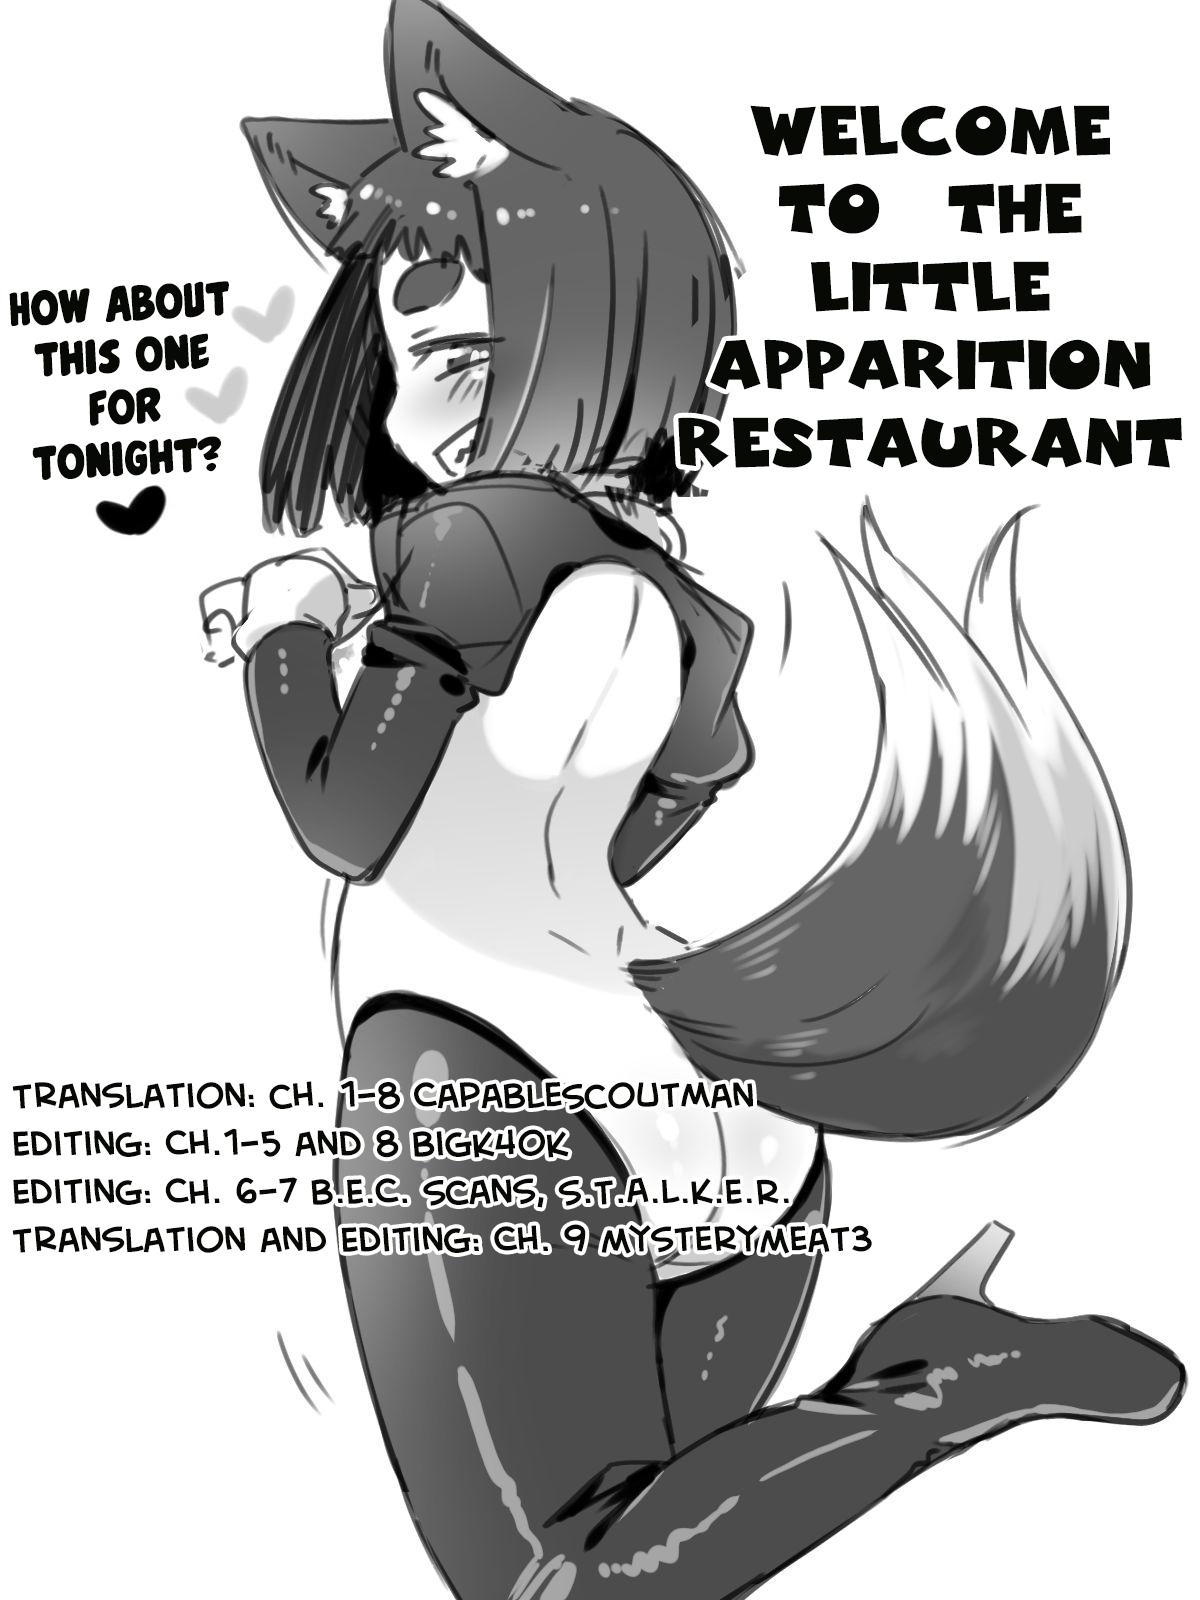 Caught Youkai Koryouriya ni Youkoso - Welcome to apparition small restaurant Amateur - Page 218